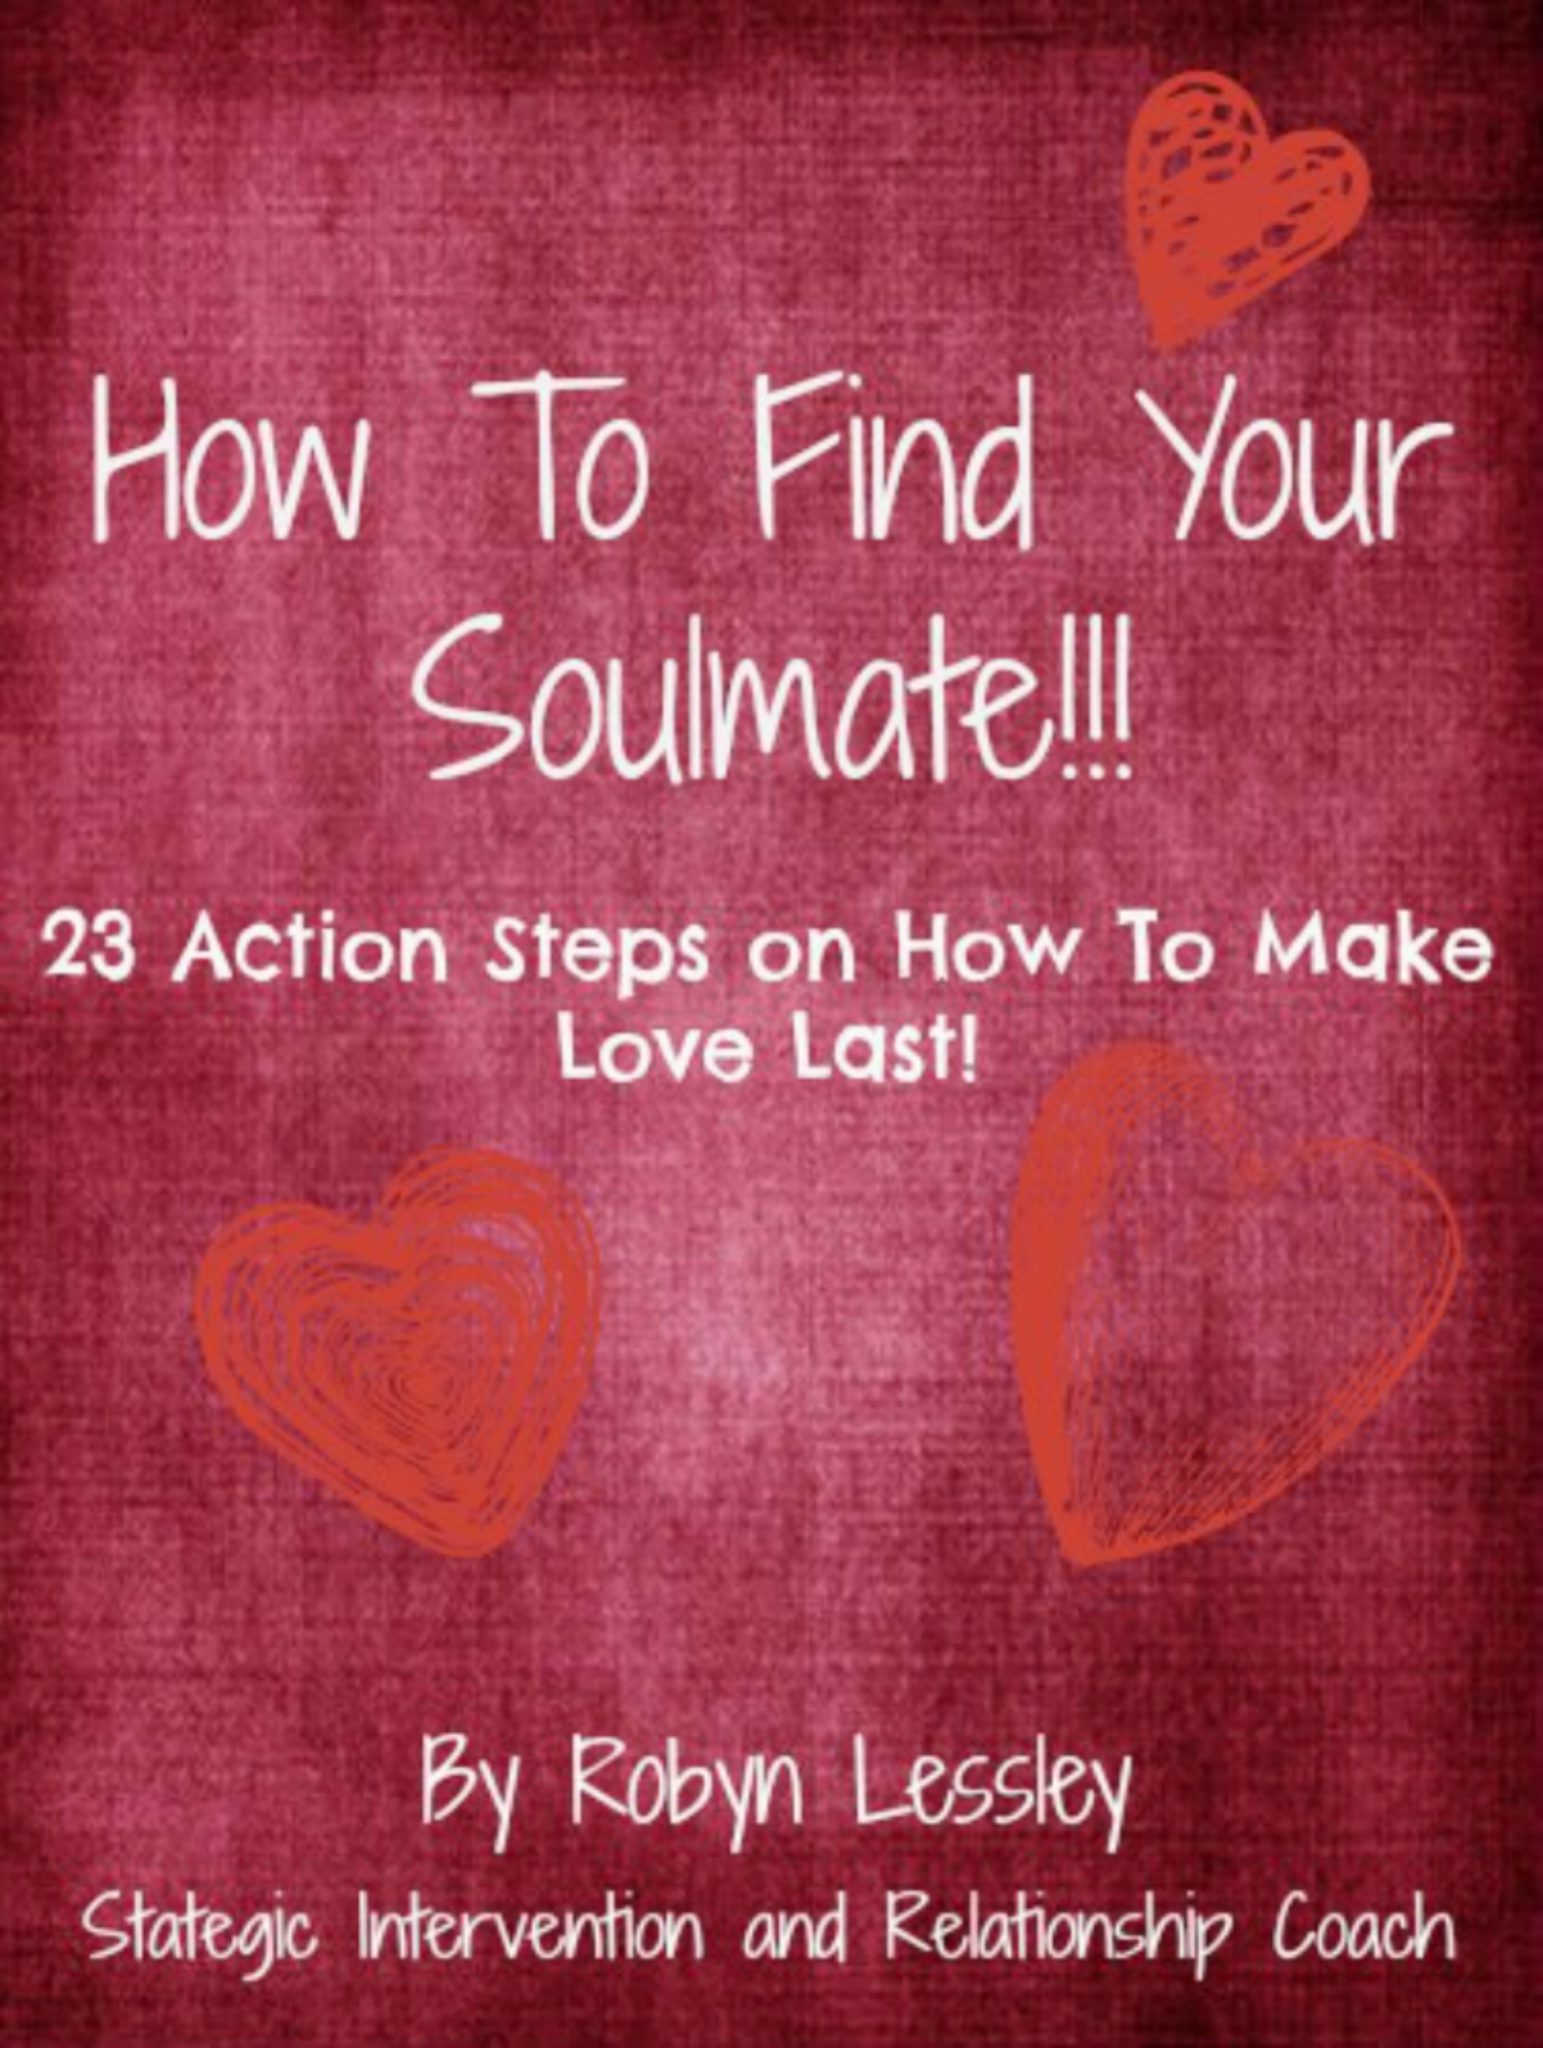 How To Find Your Soul Mate: 23 Action Steps On How To Make Love Last!! by Robyn Lessley